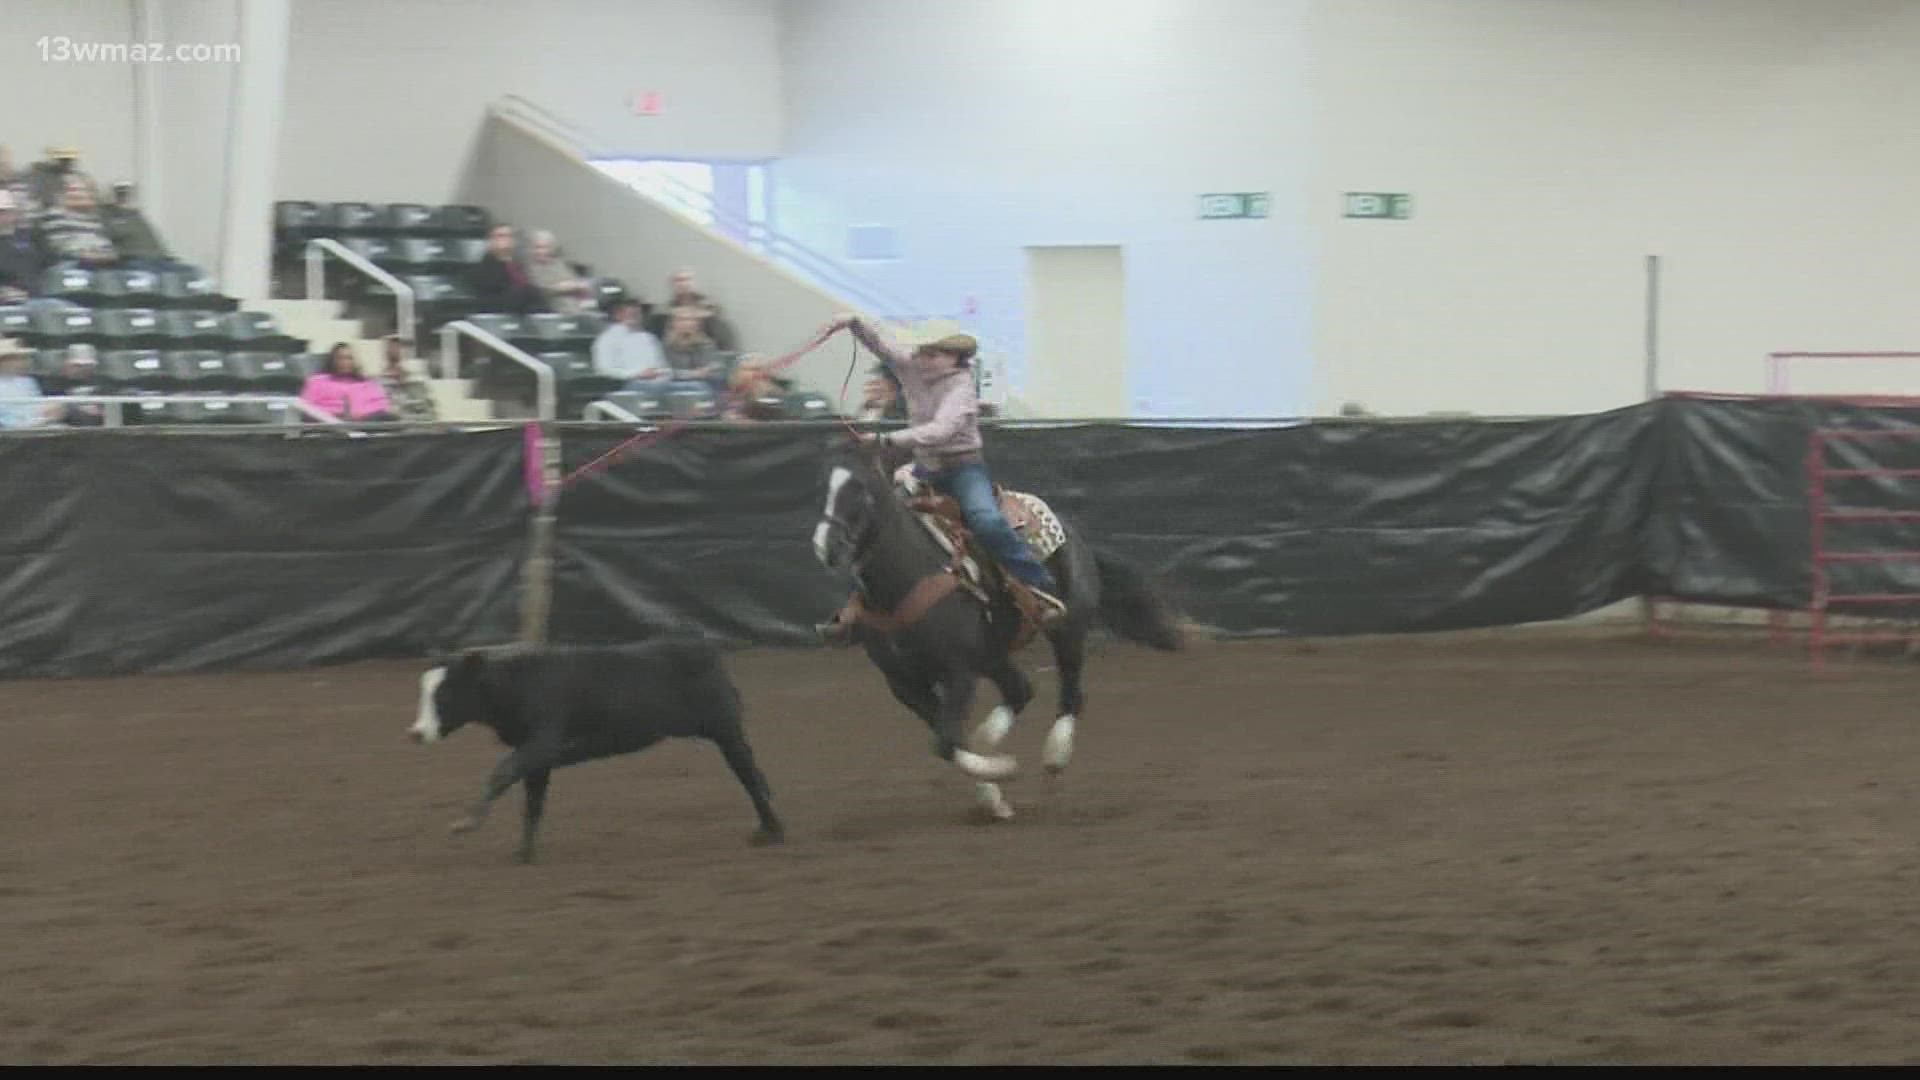 Rodeo event at the National Fairgrounds